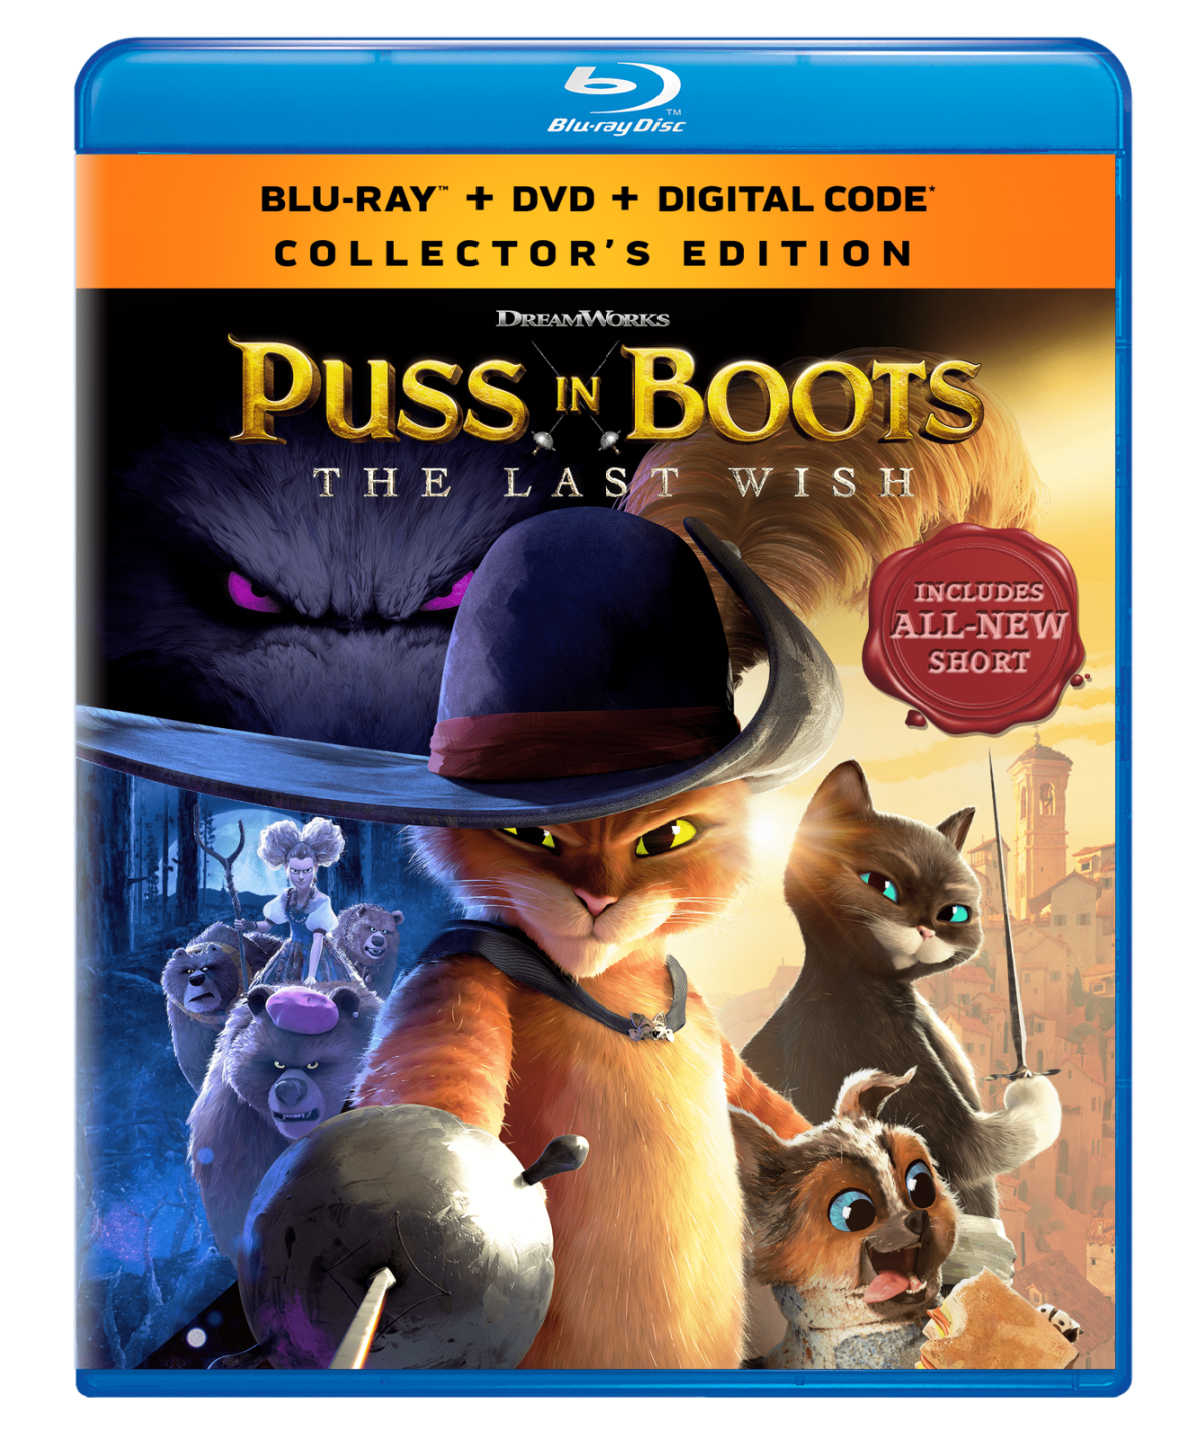 blu-ray puss in boots